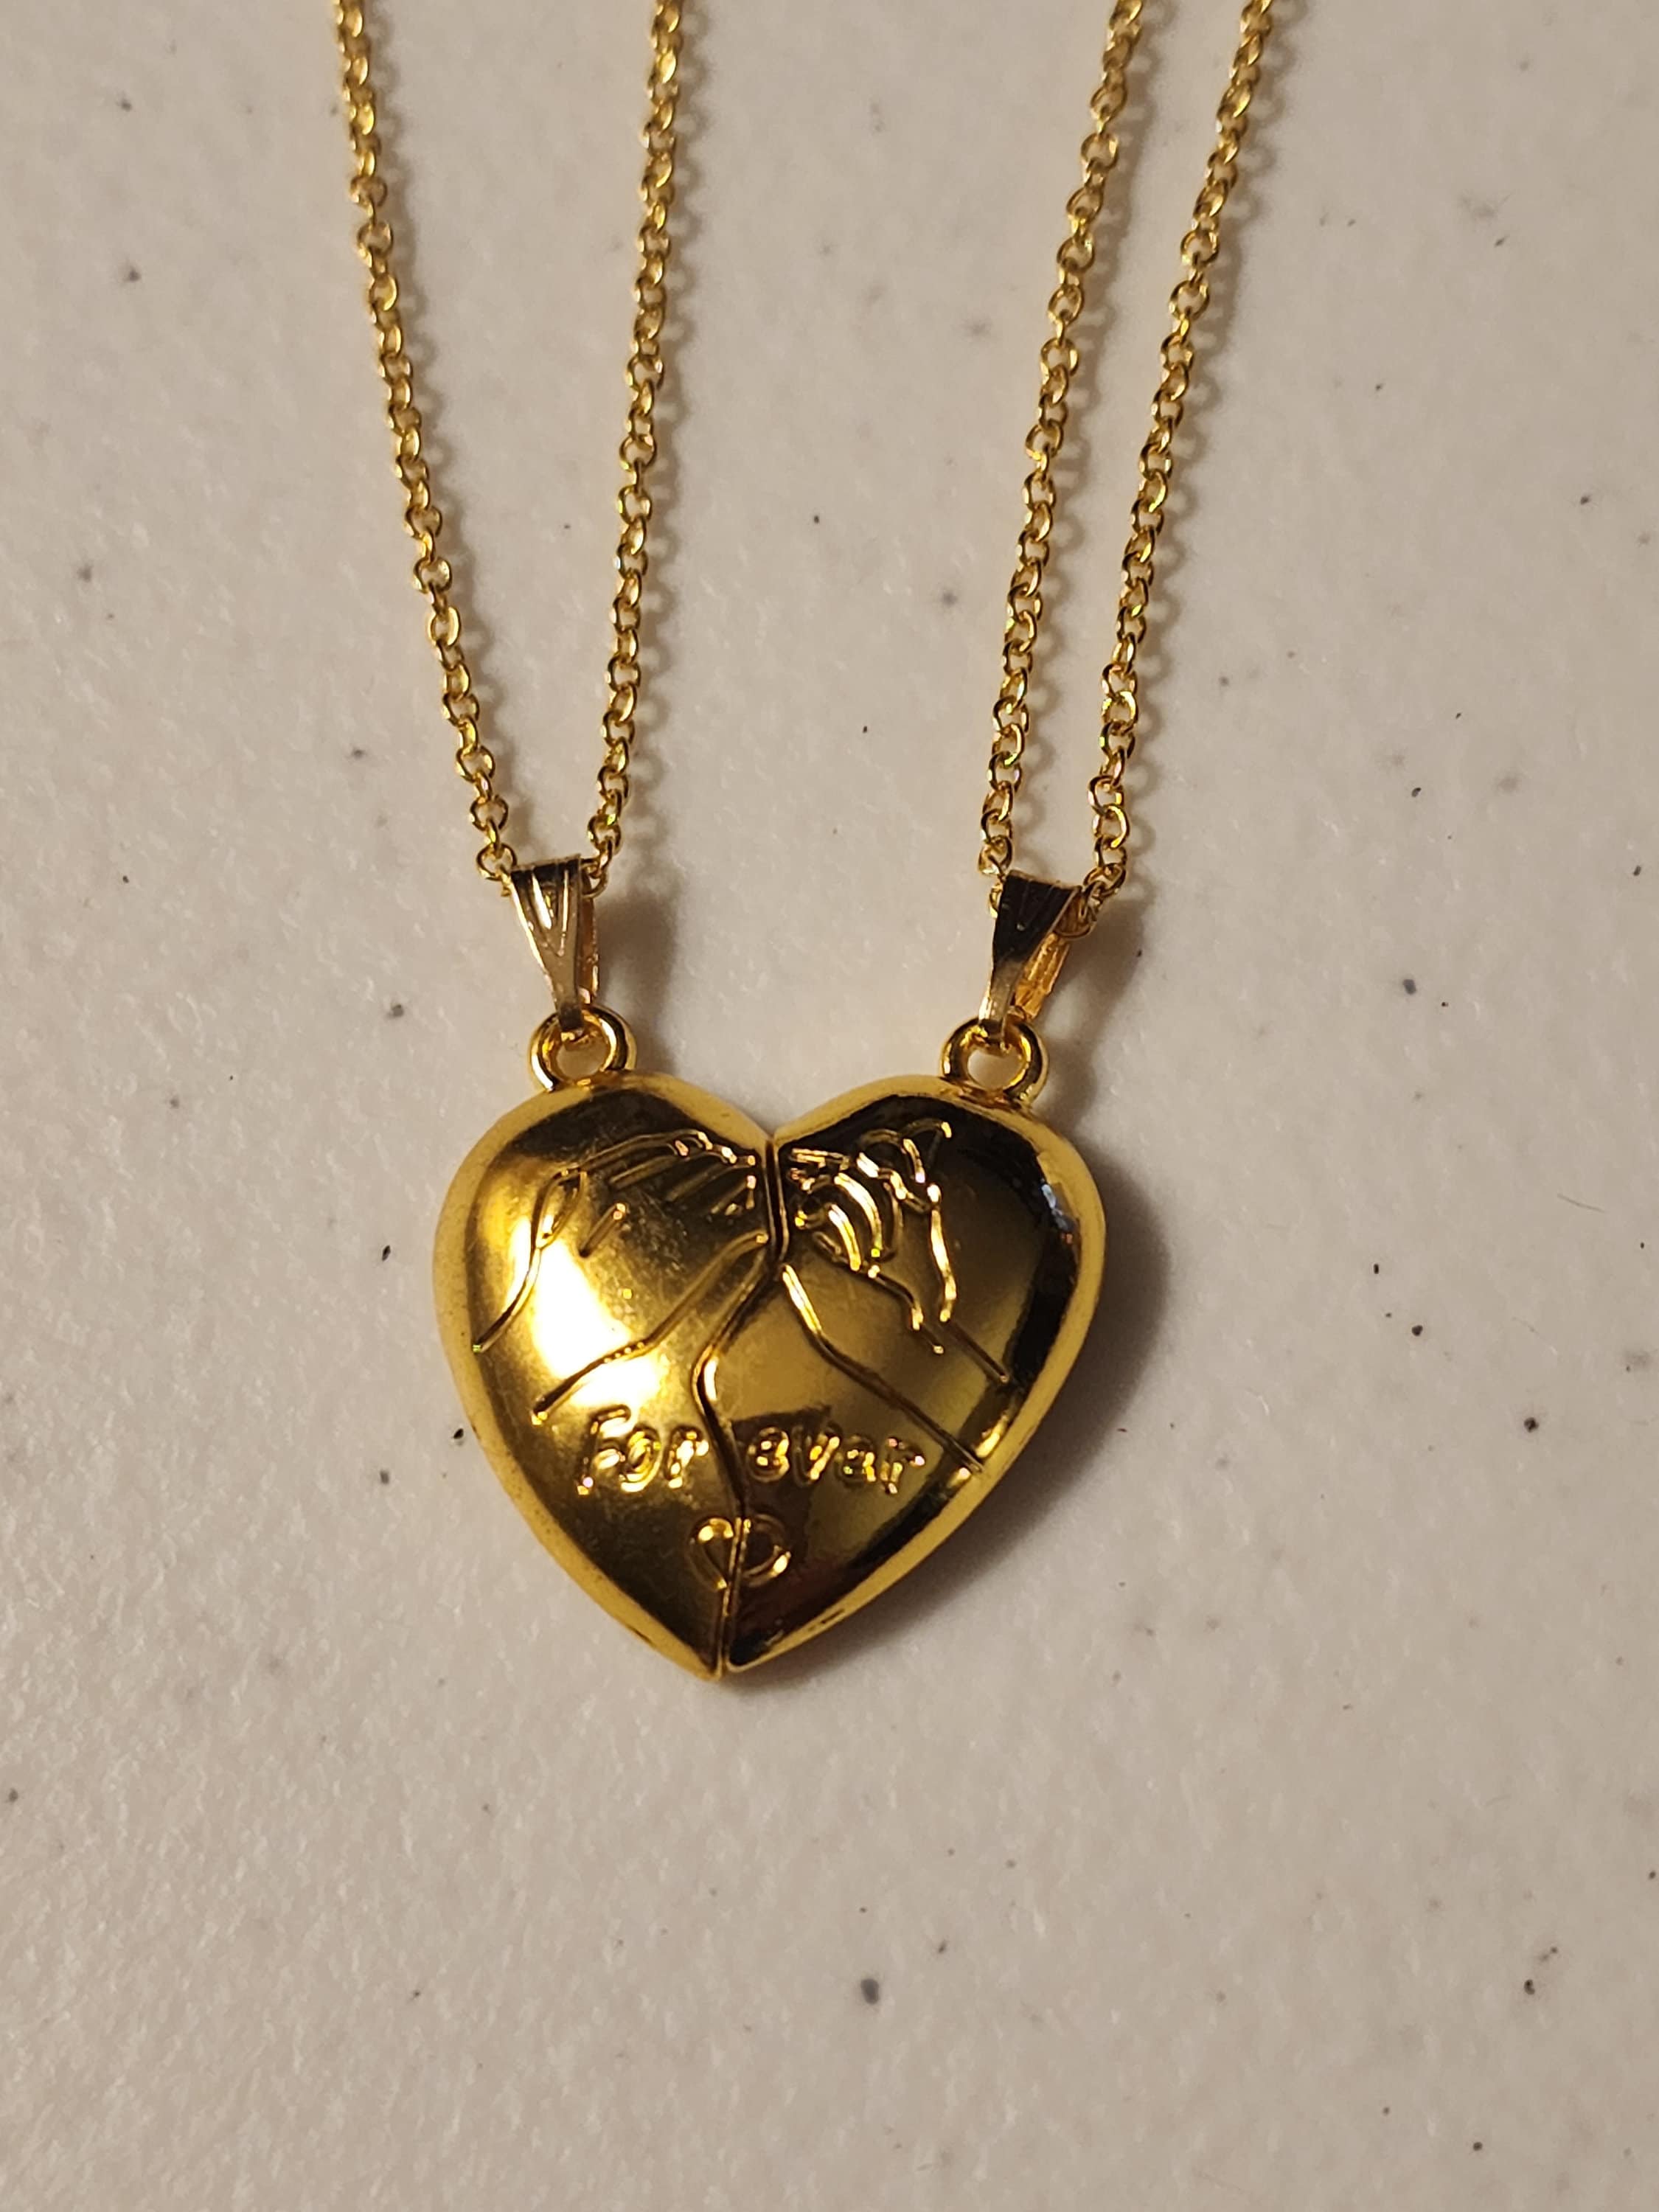 Magnetic Heart Couple Necklaces - BigBeryl Gold Silver